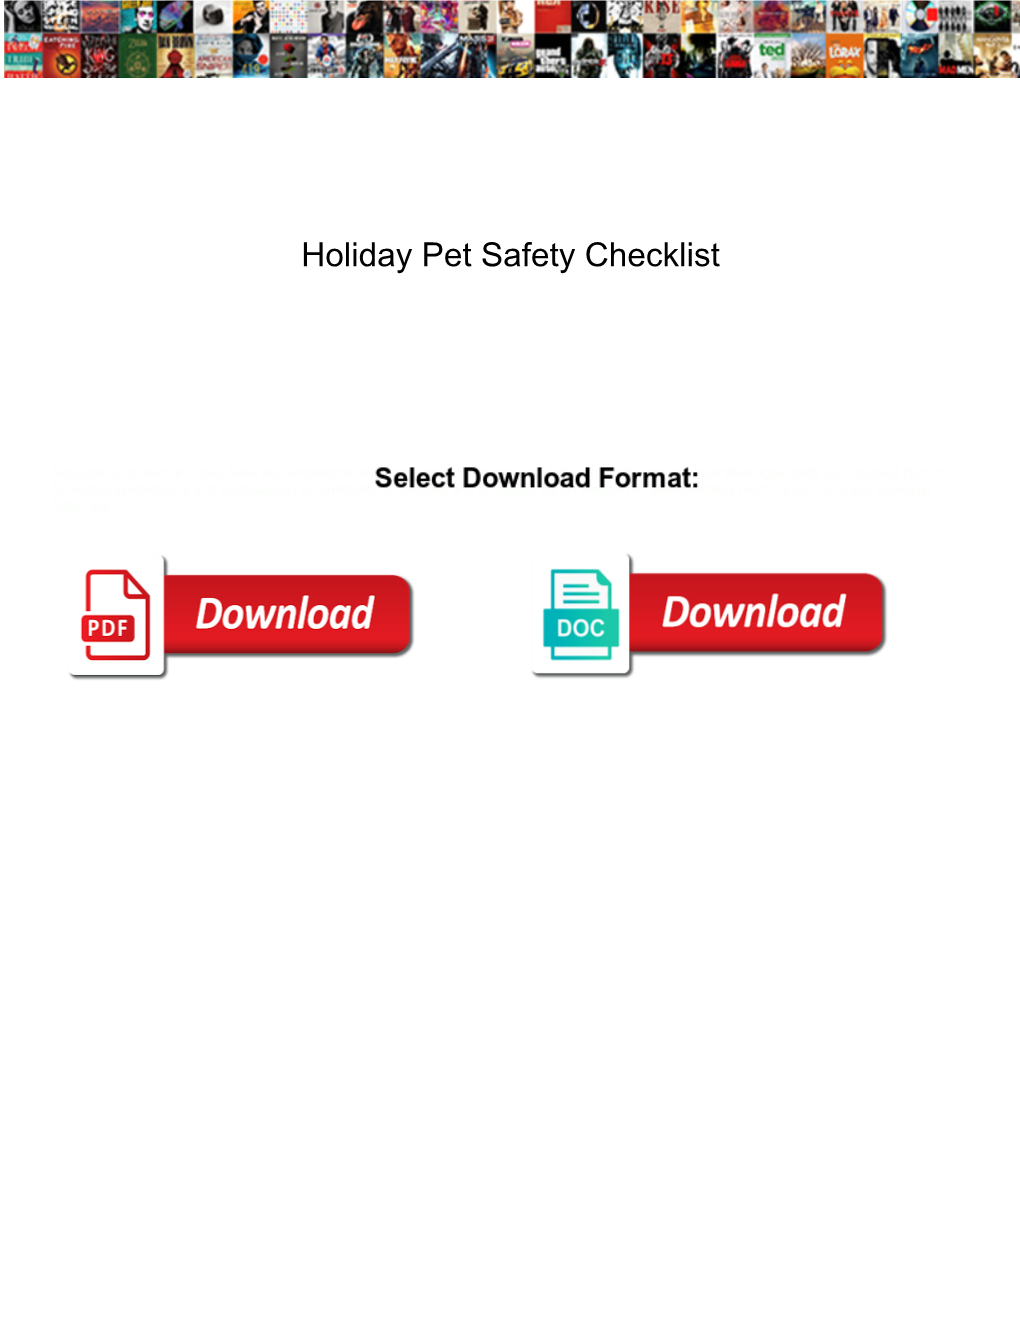 Holiday Pet Safety Checklist